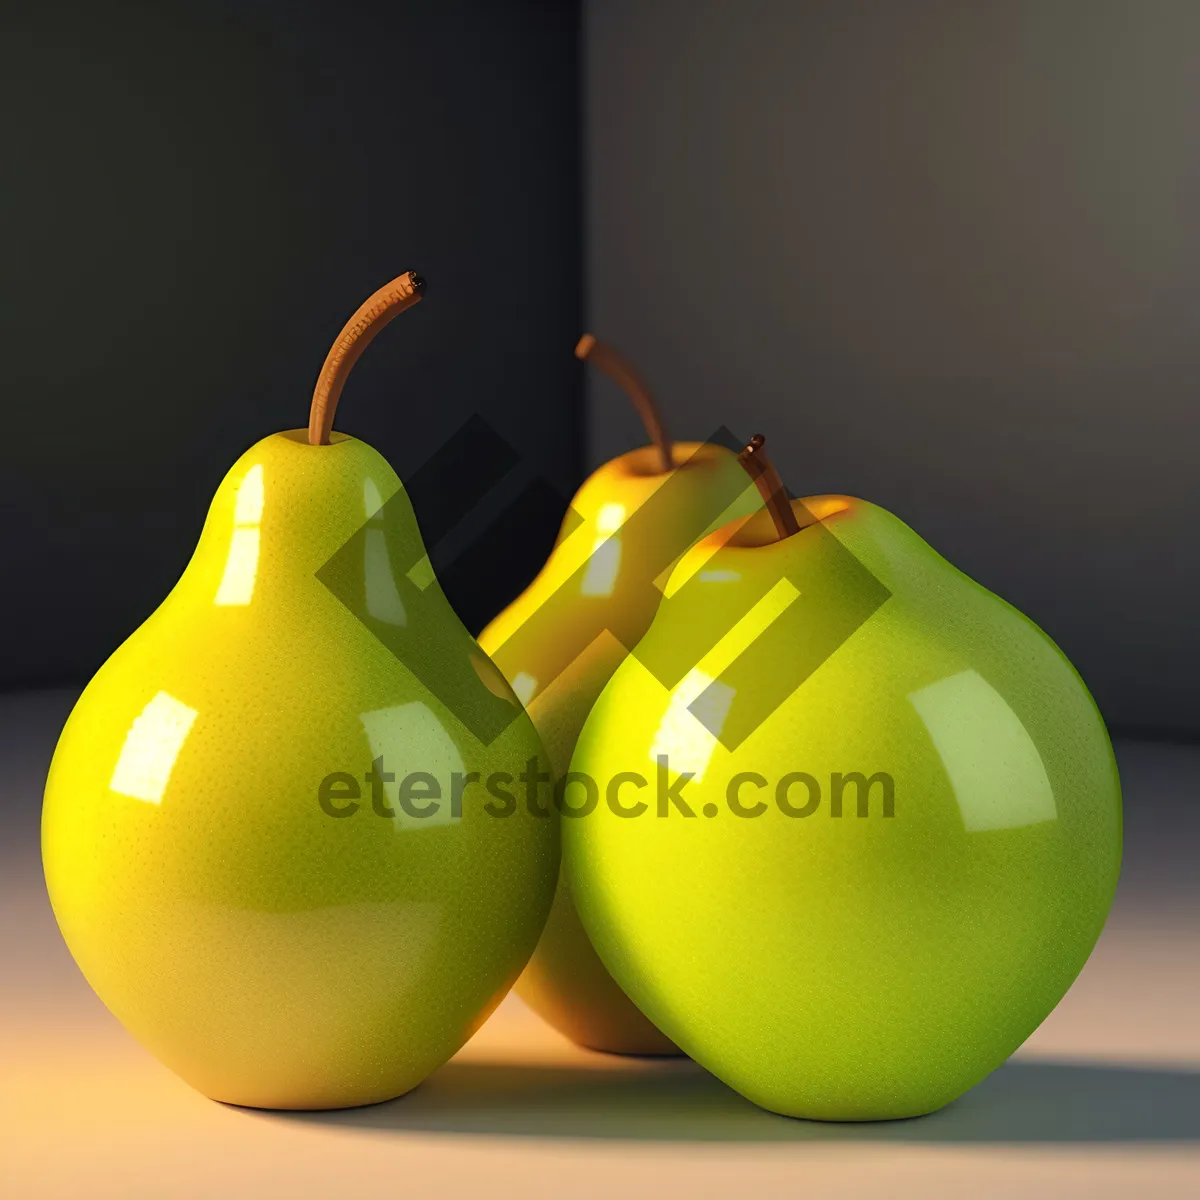 Picture of Shiny Sour Apple Food Icon